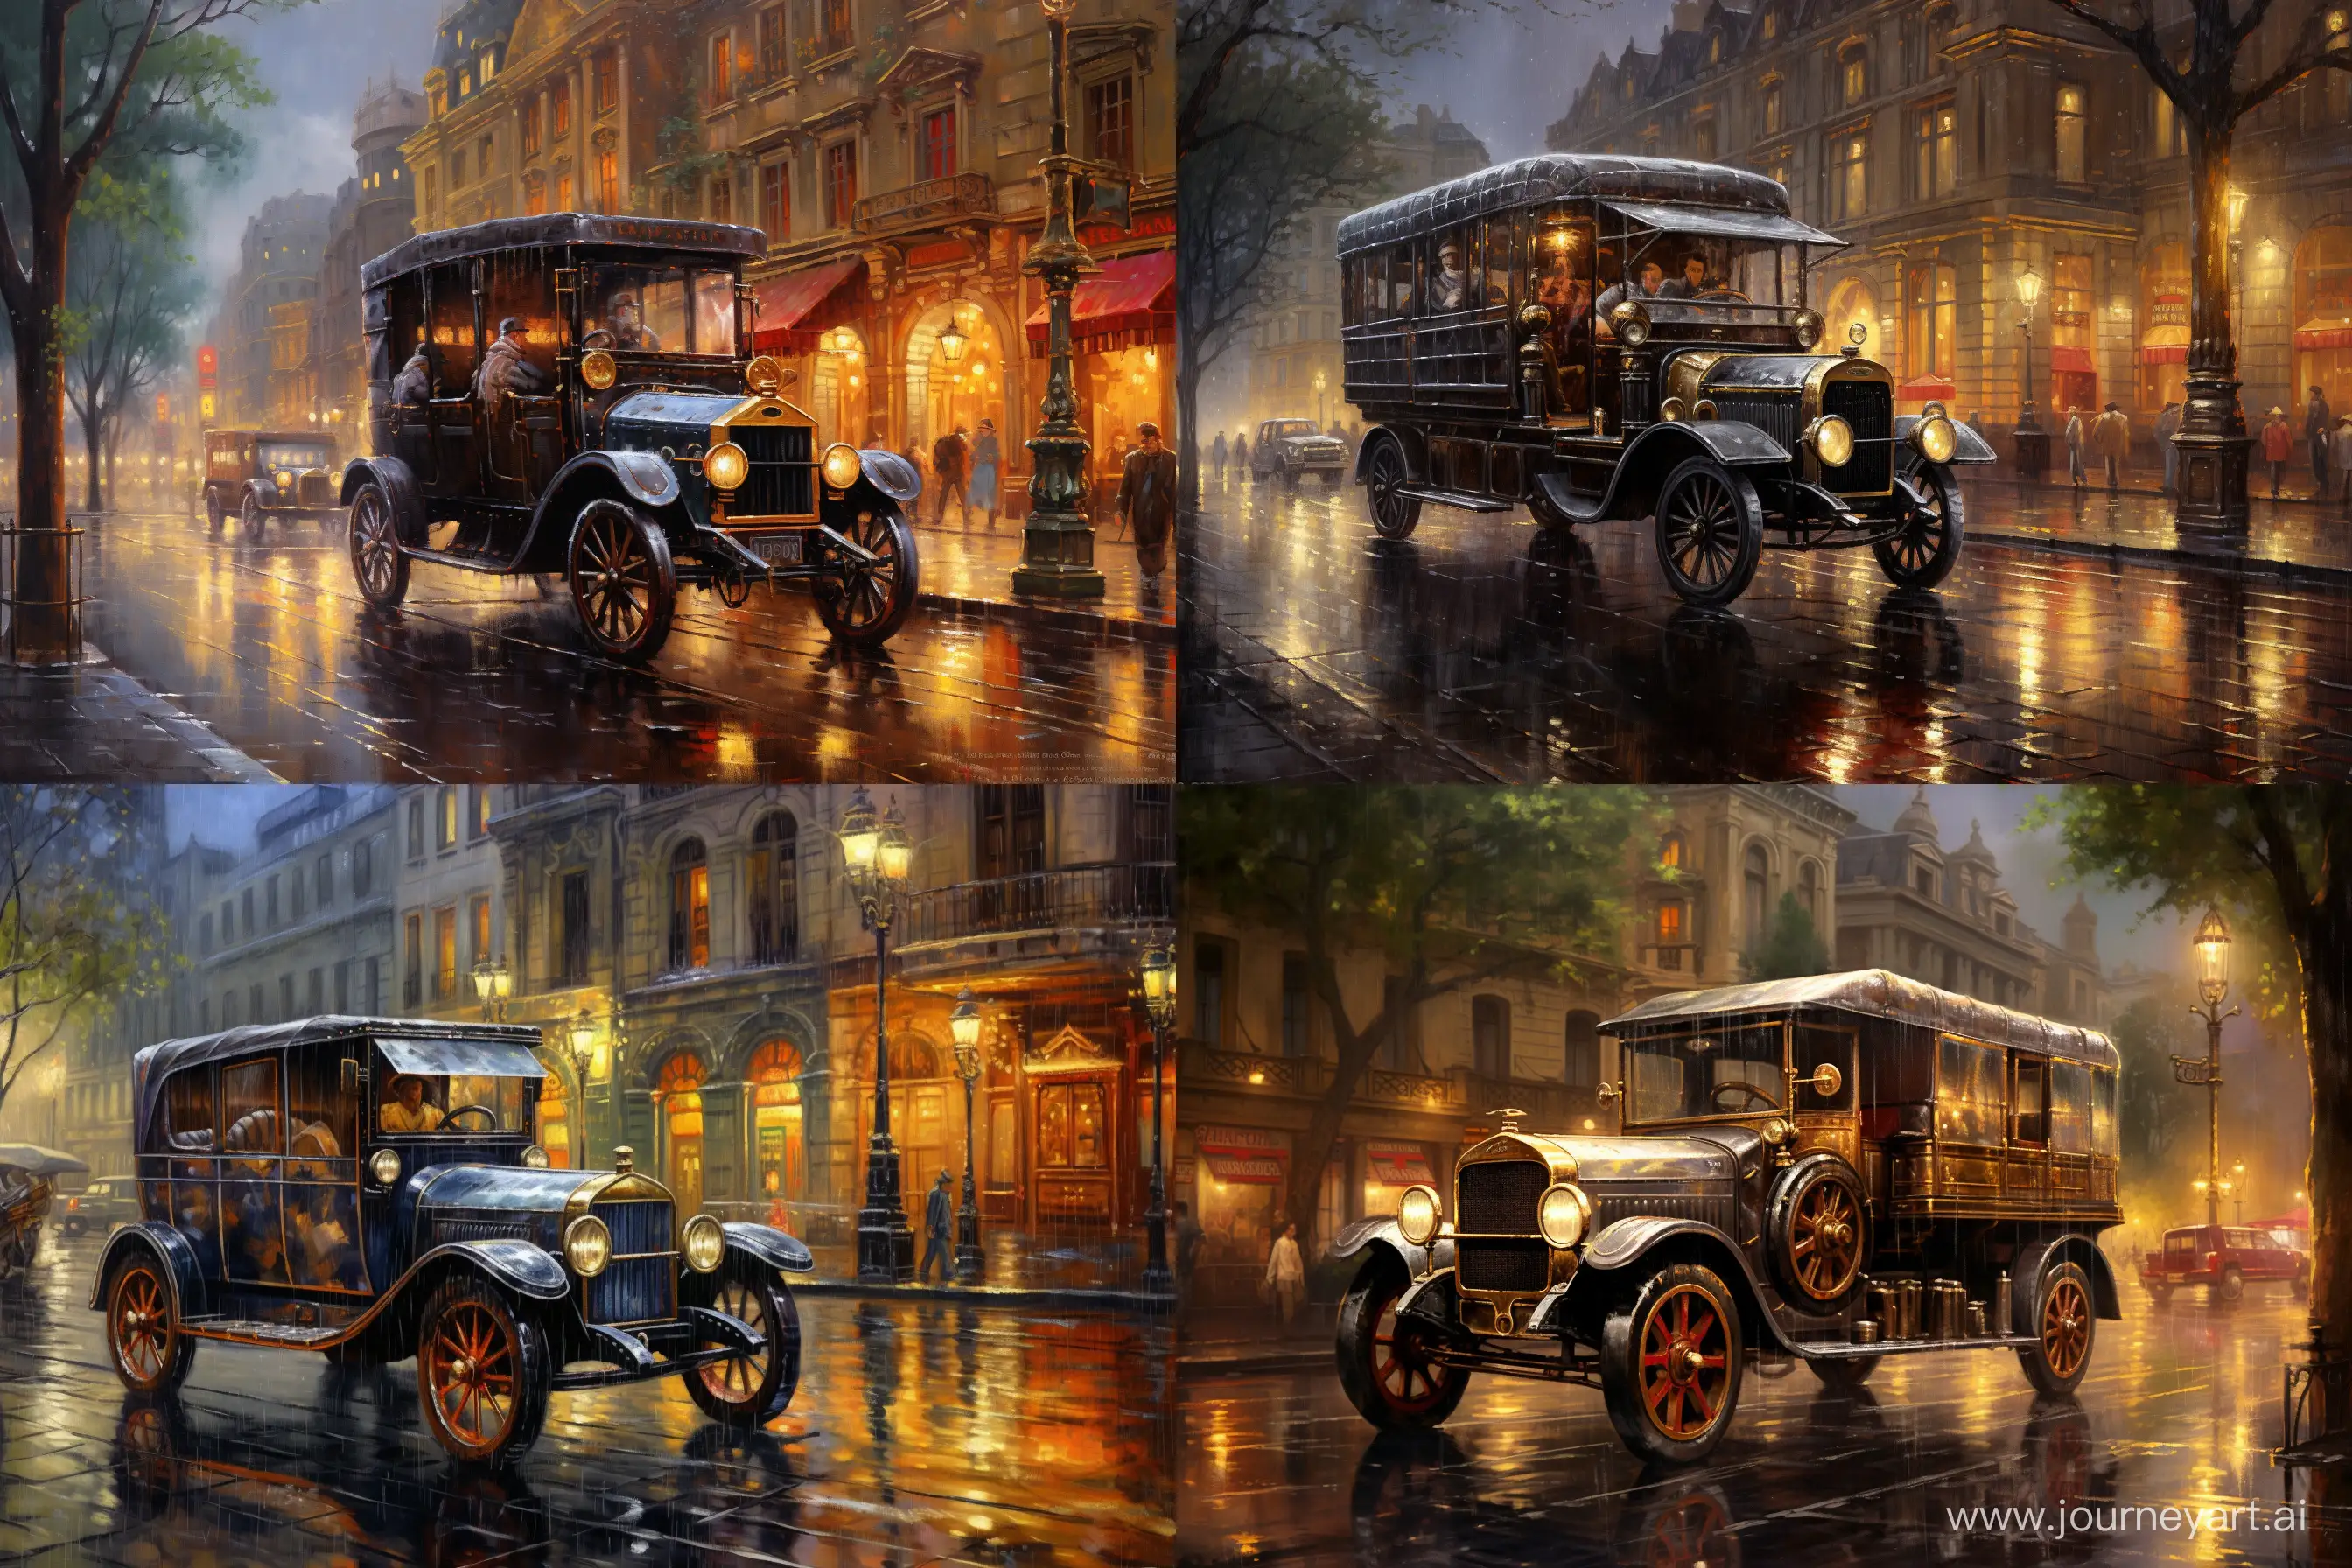 Rainy-Parisian-Scene-1930s-Vintage-Truck-and-Cars-in-Baroque-Style